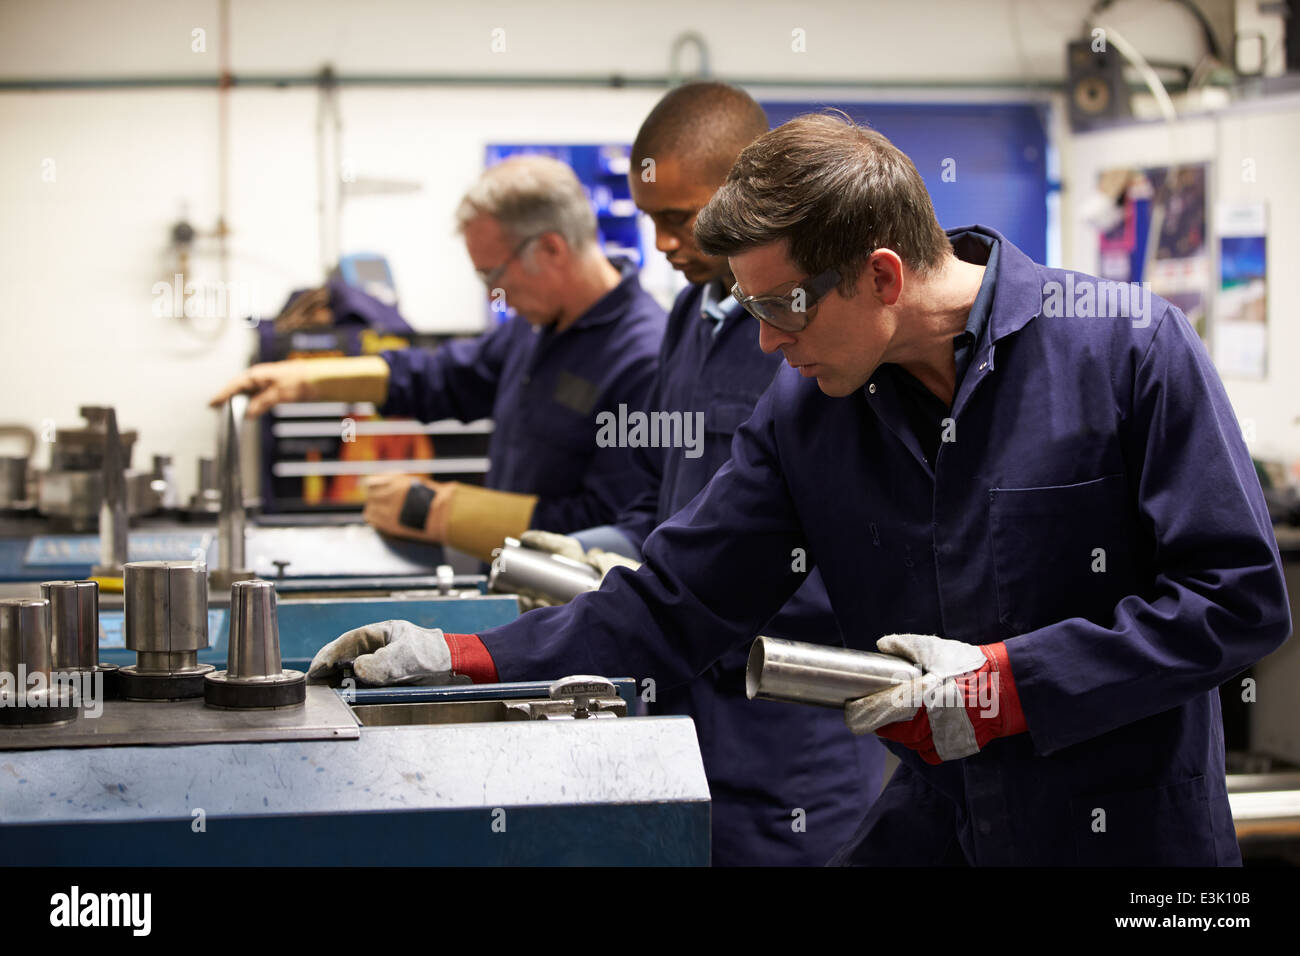 Busy Interior Of Engineering Workshop Stock Photo